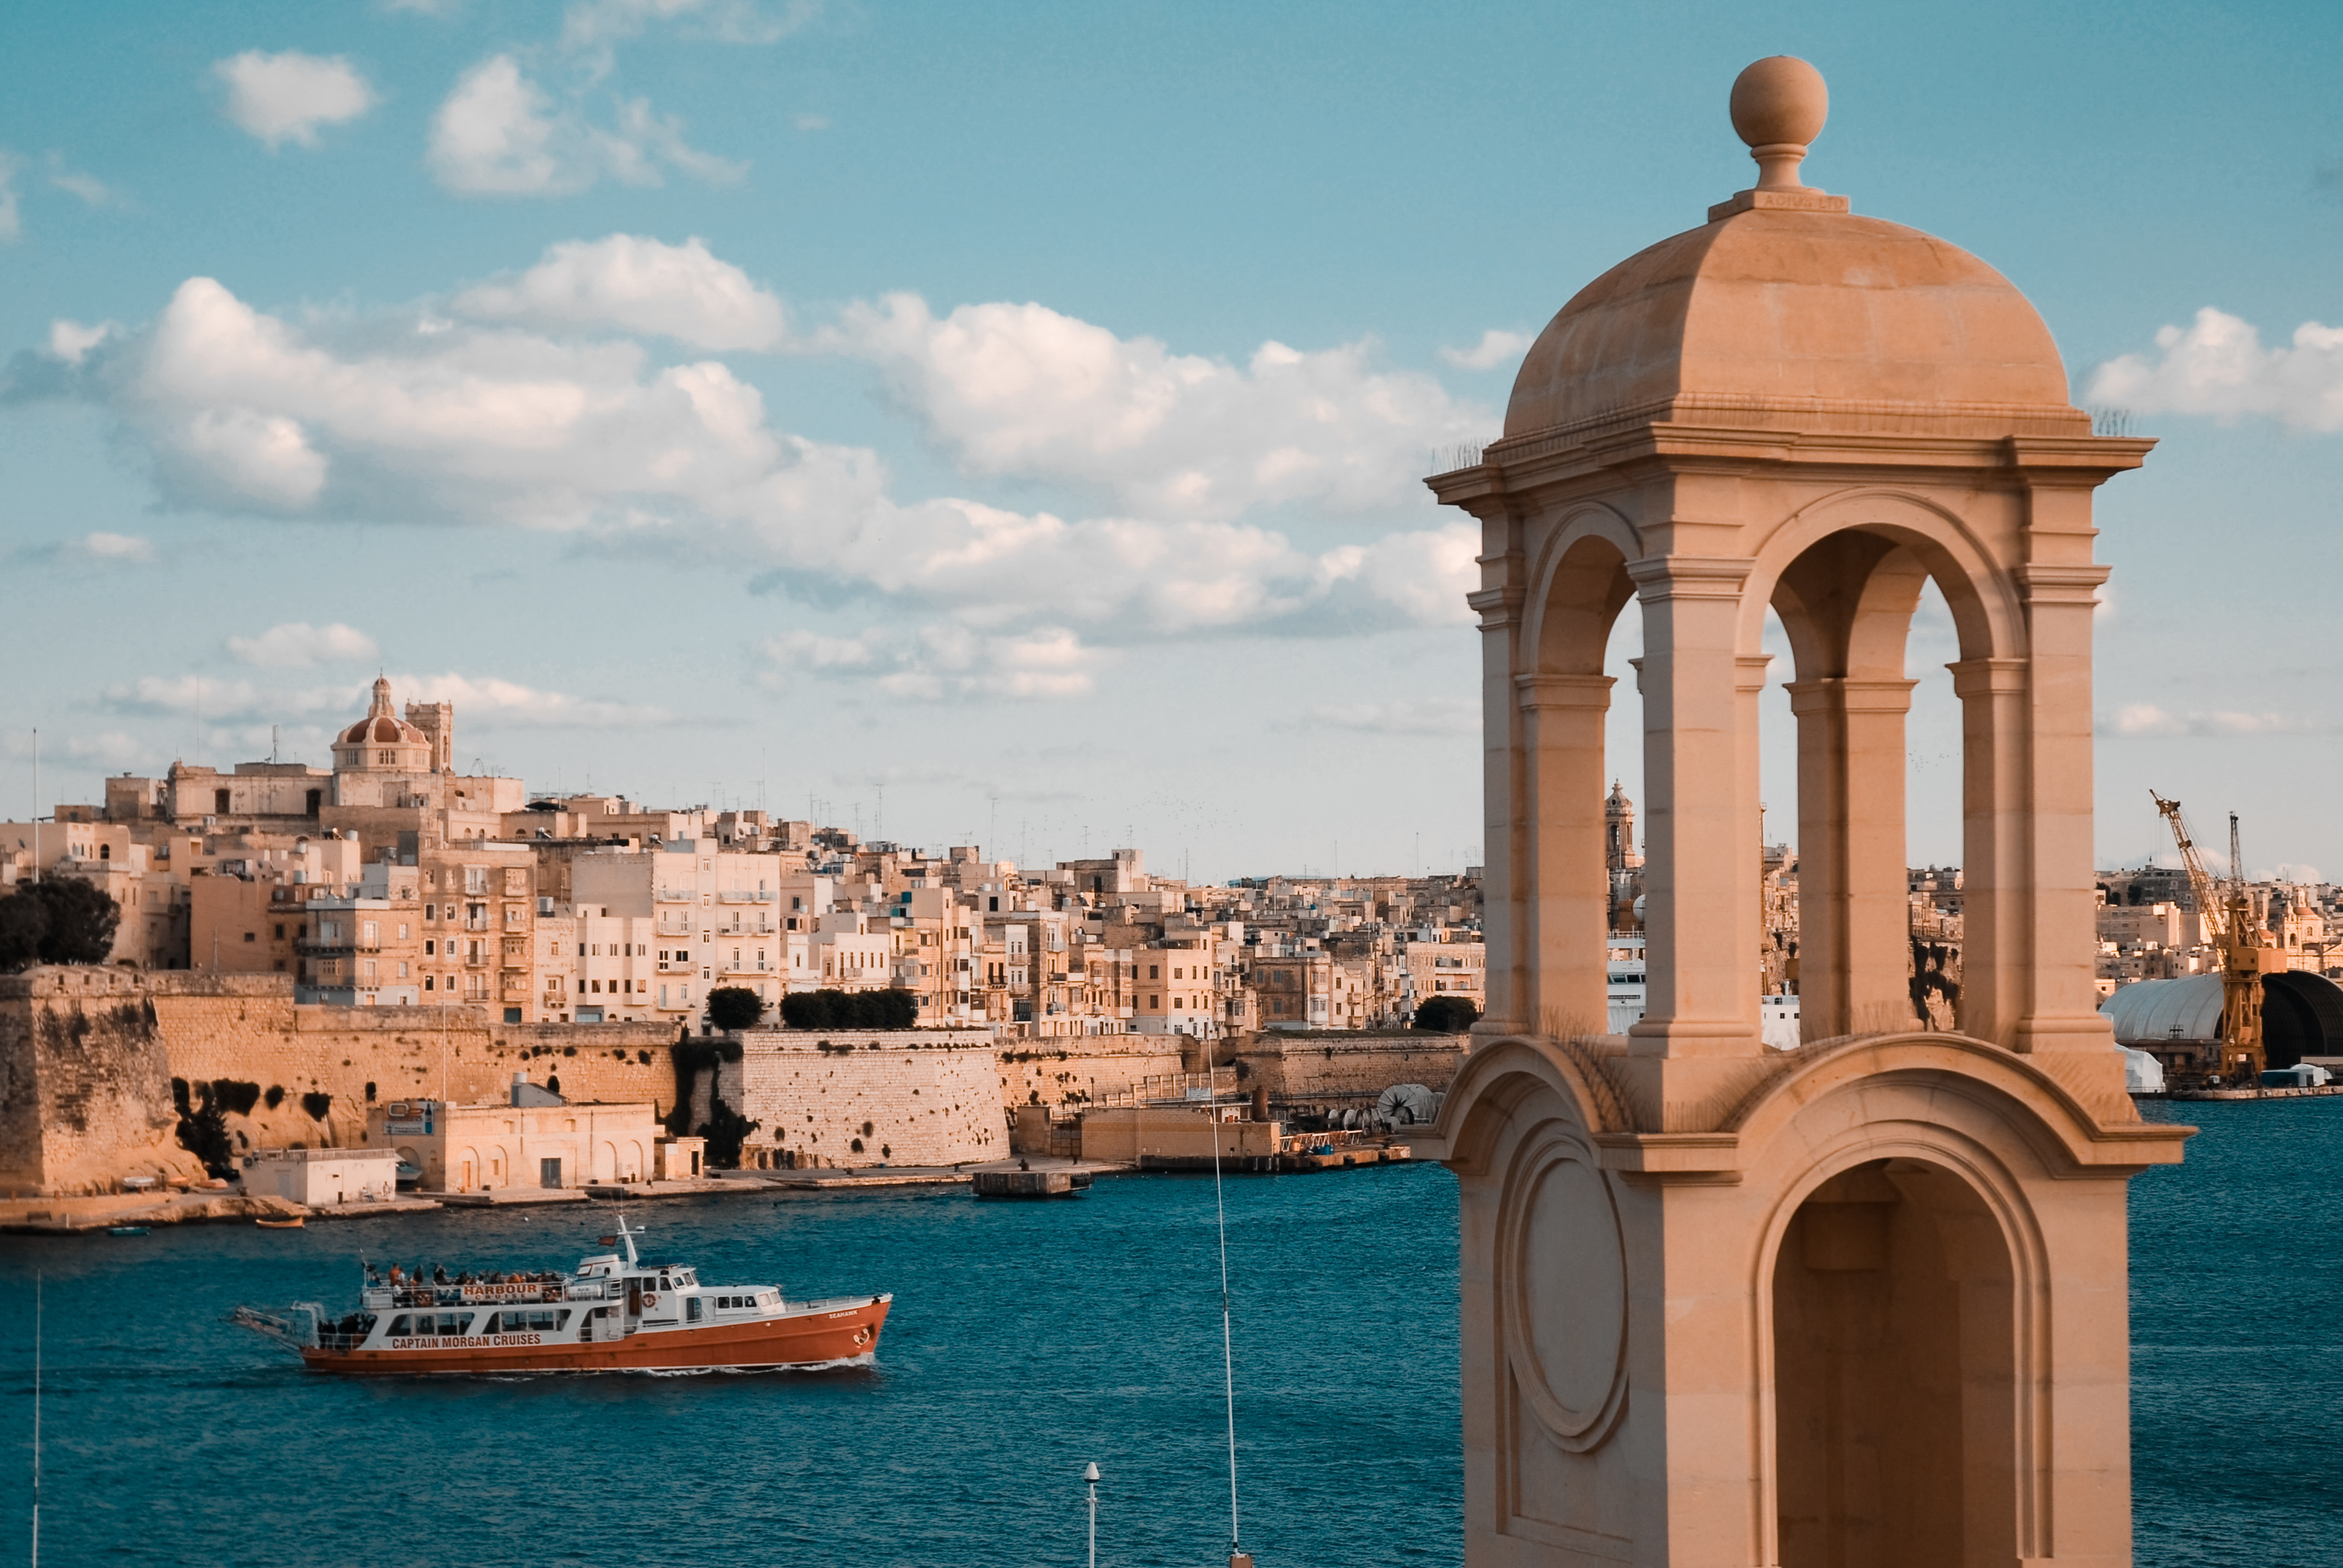 View of the Old Walled City of Valletta and its harbor